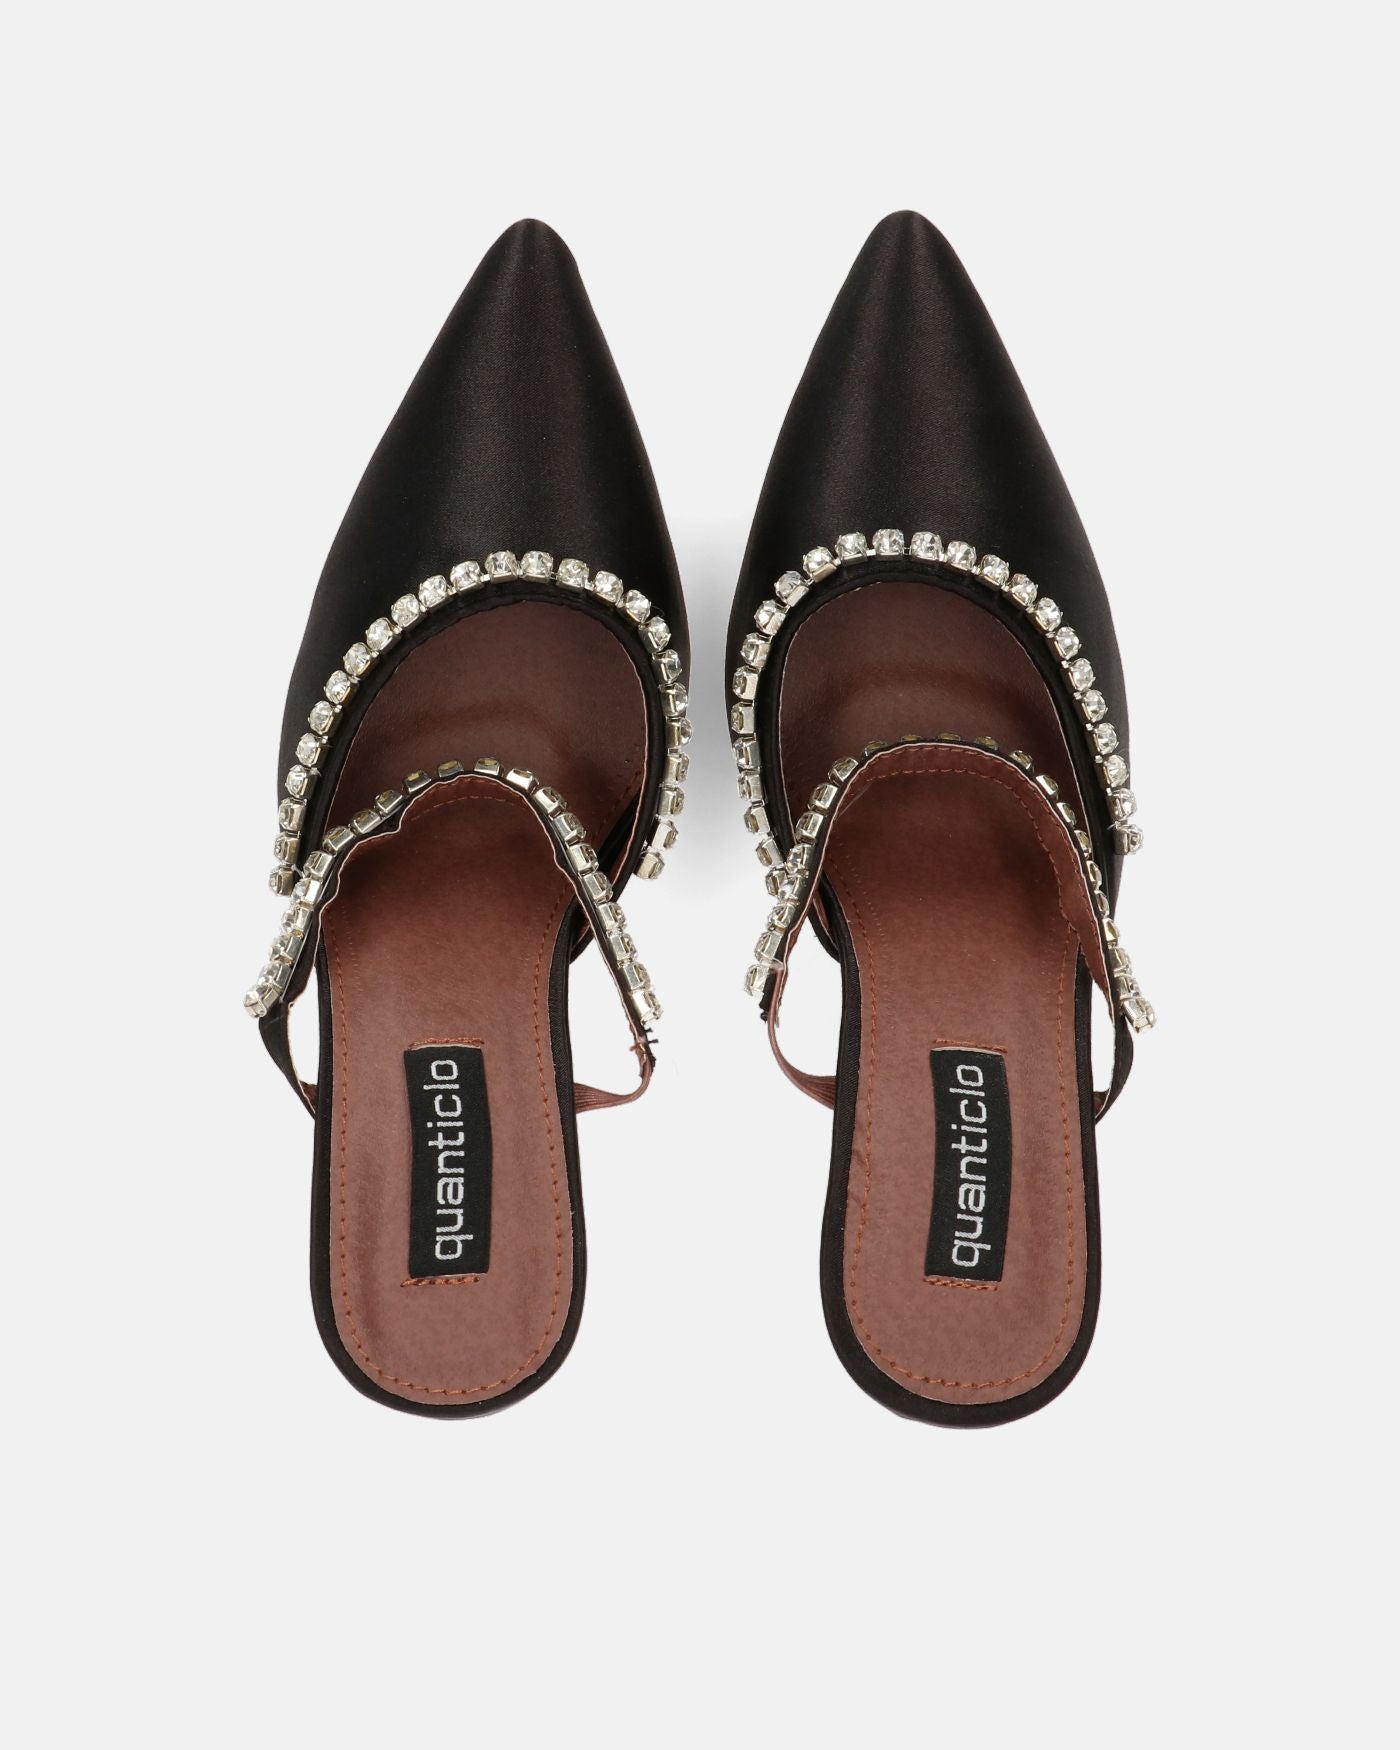 PERAL - heeled shoe in black lycra with gems